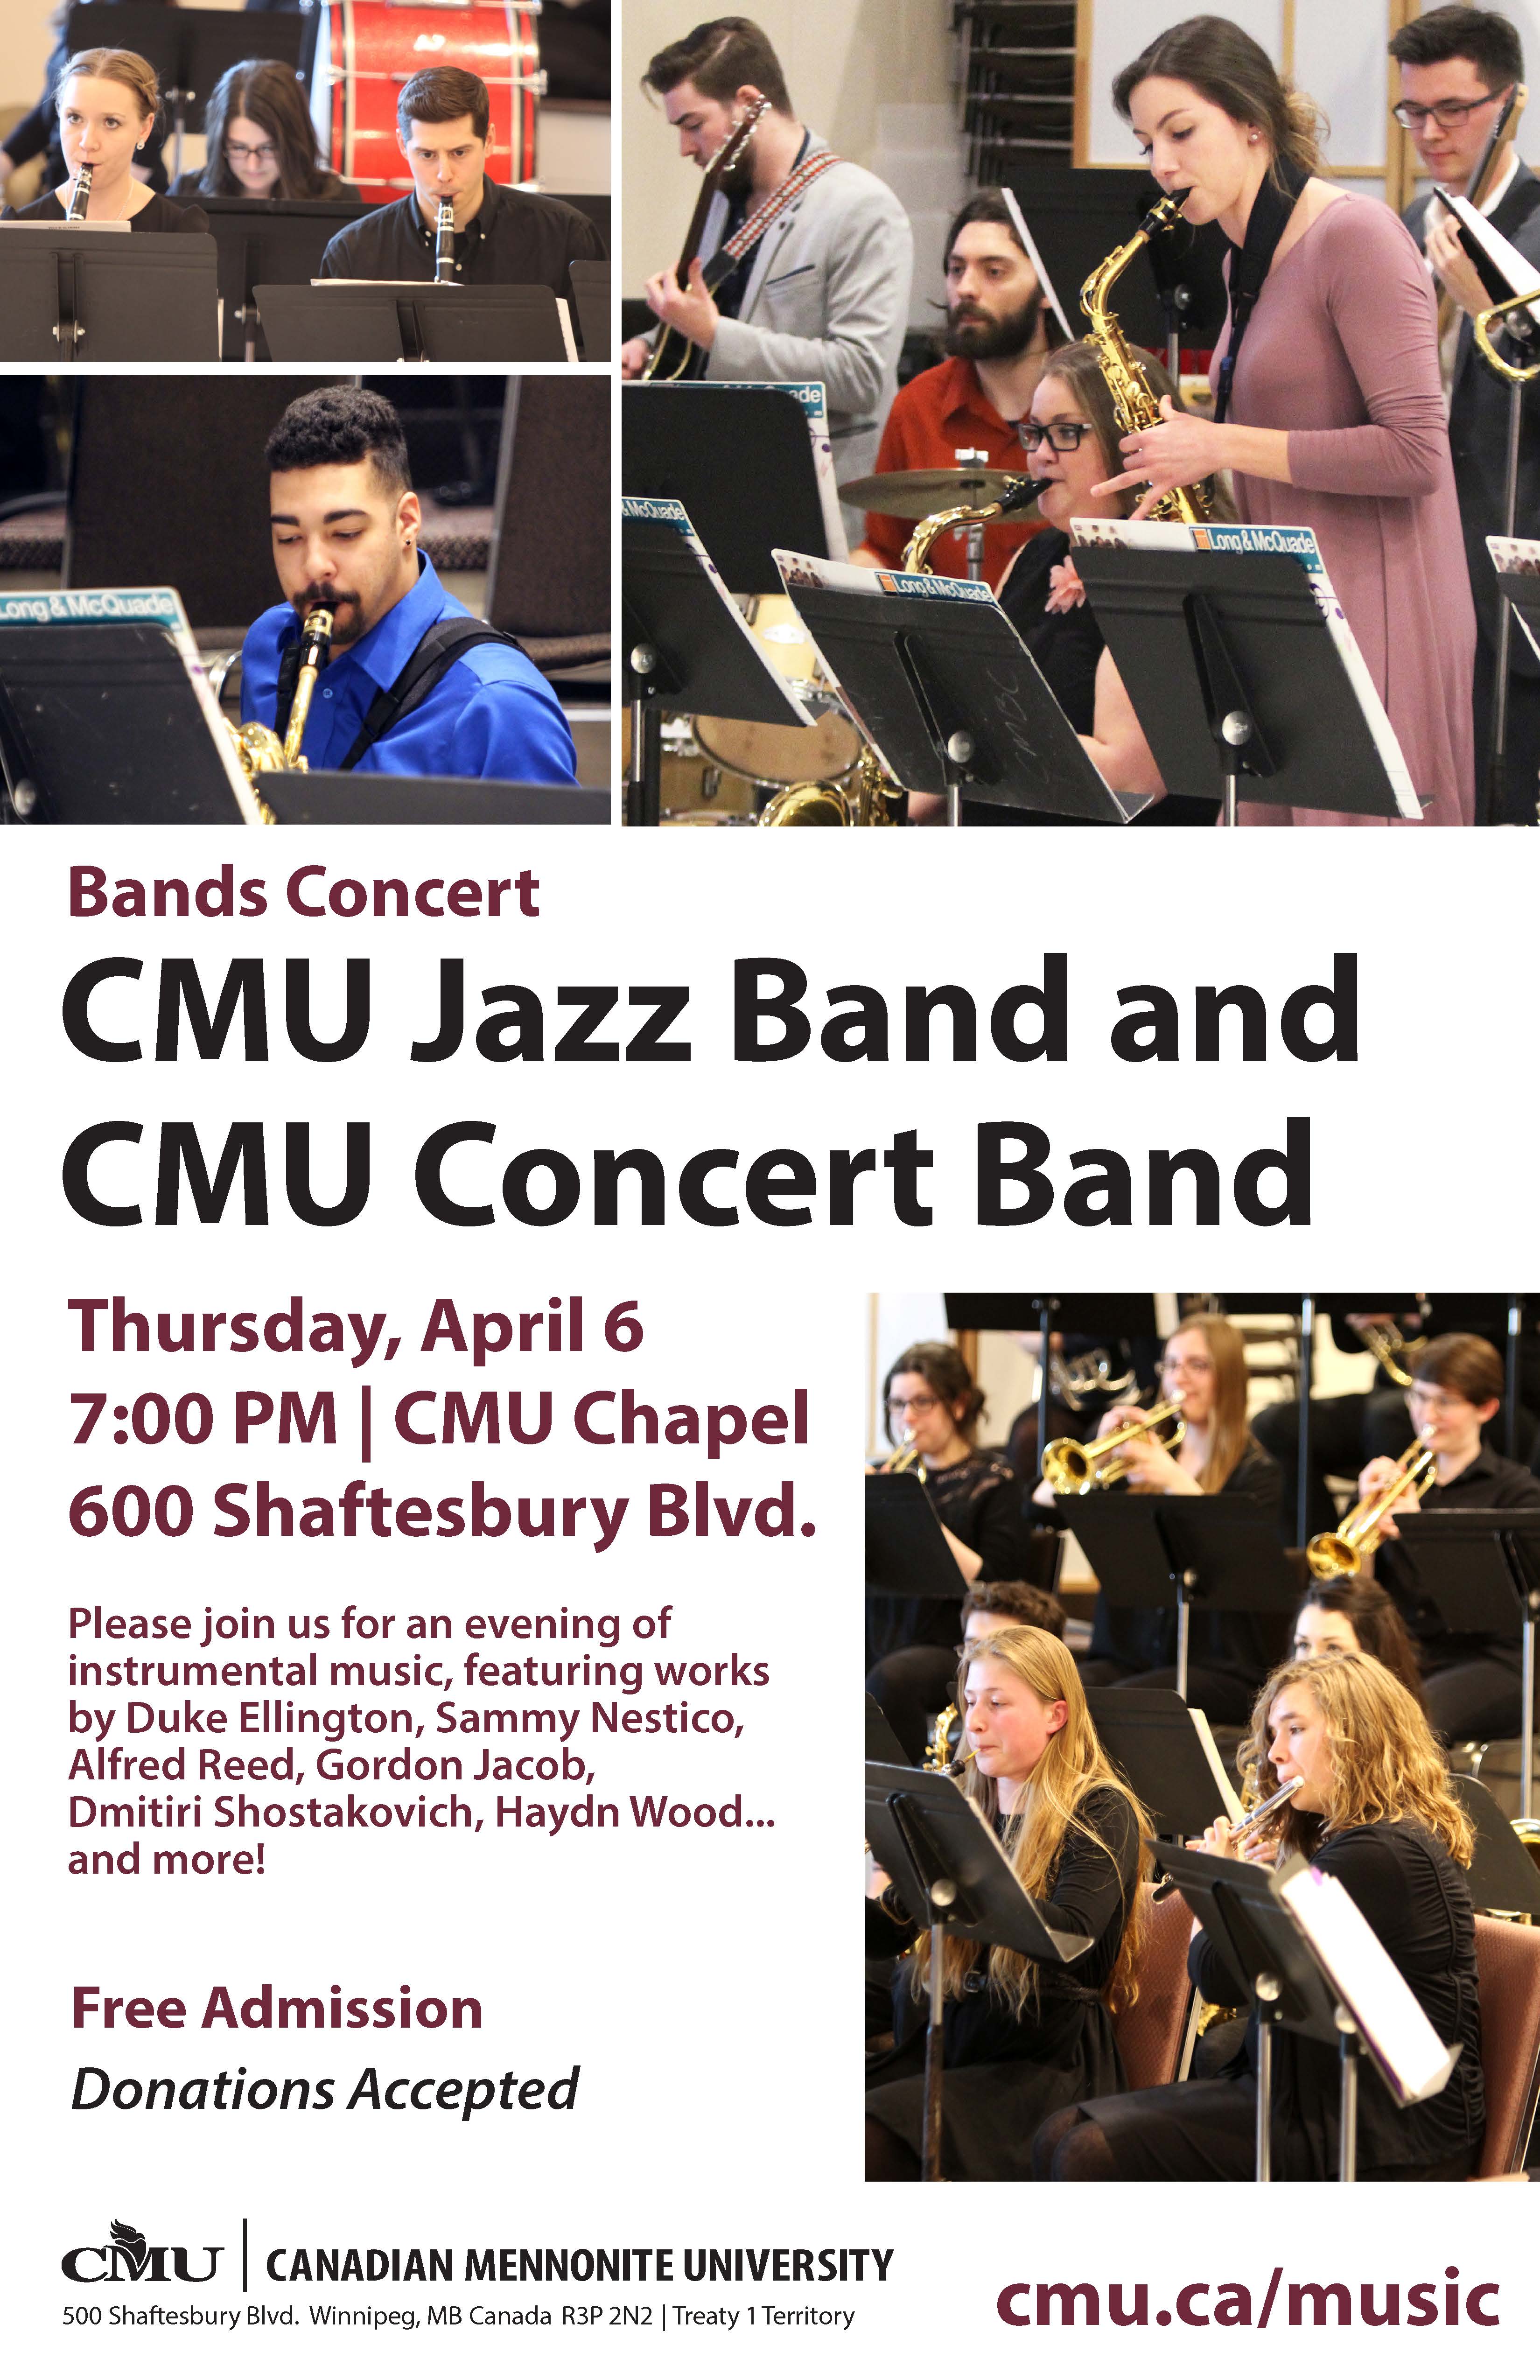 CMU Concert Band and CMU Jazz Band Perform in Concert